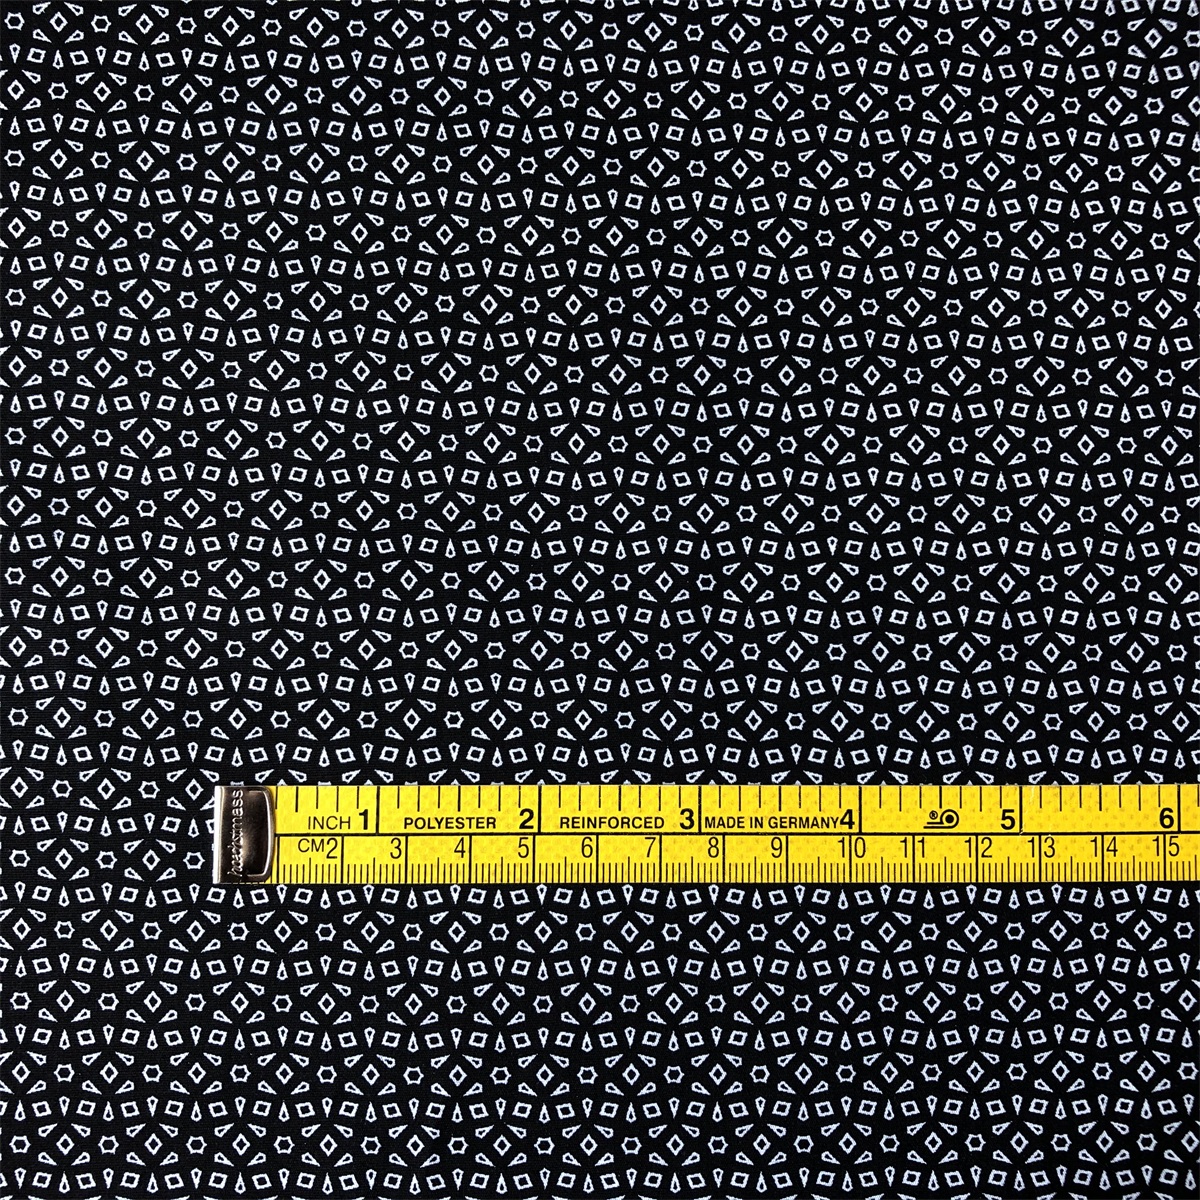 Sun-rising Textile Cotton Printed fabric new fashionable pattern 100%cotton poplin printed fabric for men's casual shirts